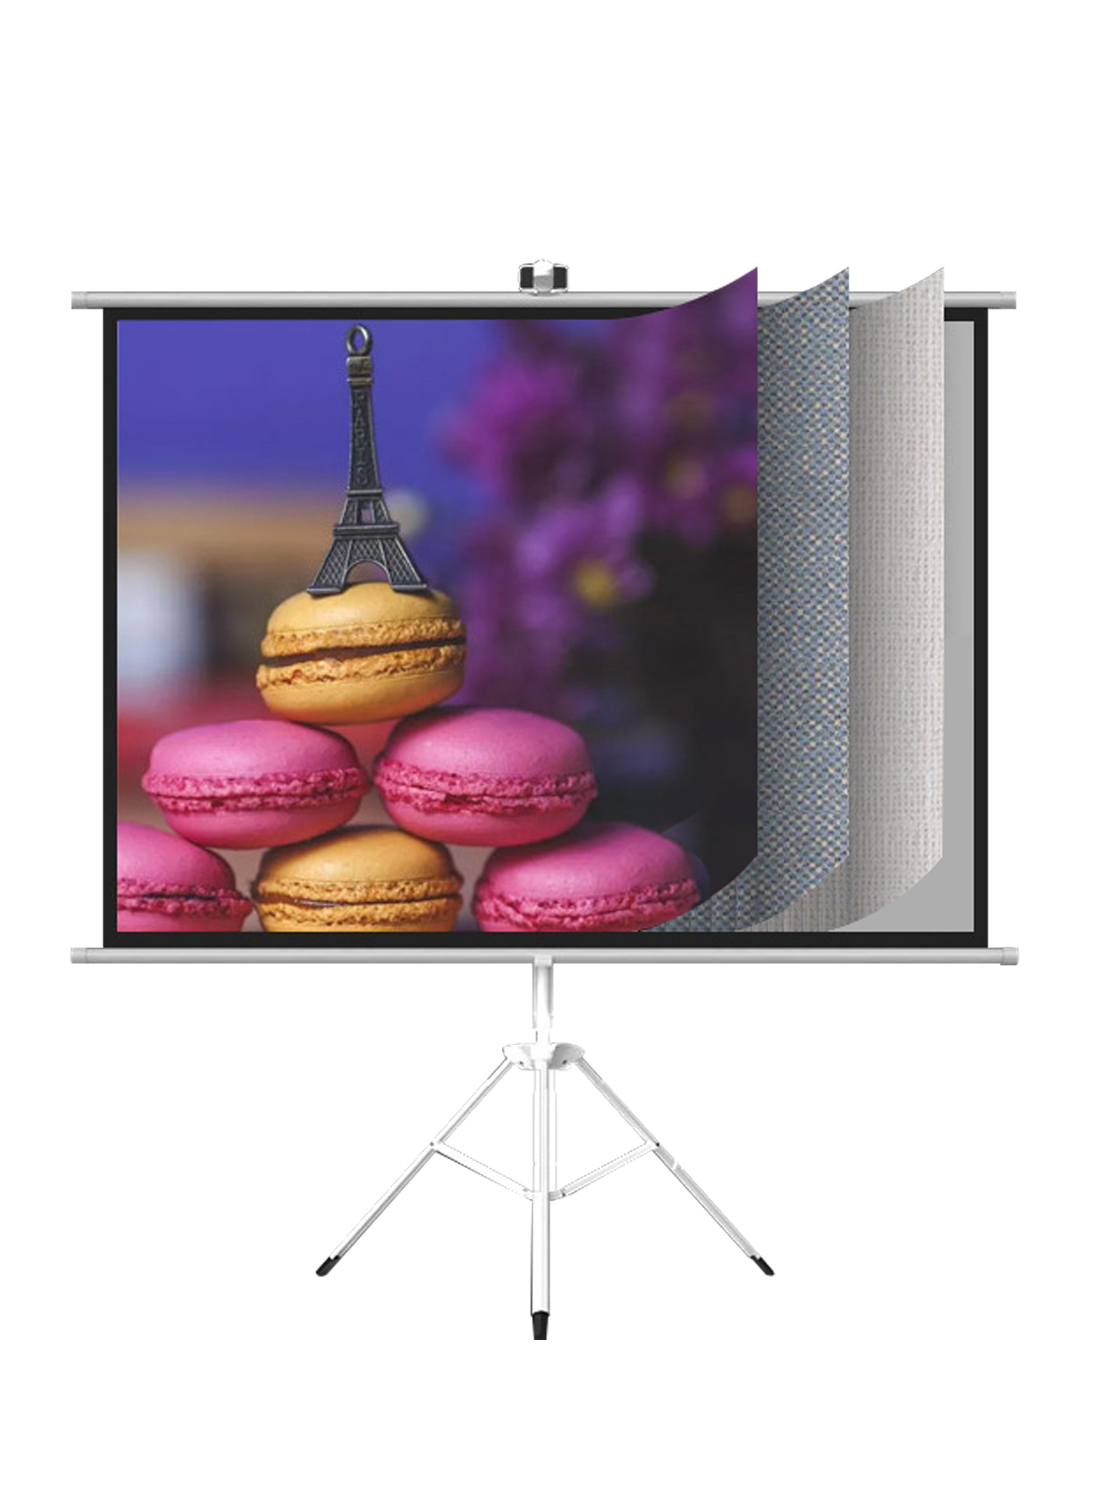 84 inch 16:9 Portable Projection Screen, 2-in-1 Wall Mount &amp; Tripod Stand. White Fiberglass Material, Projector Screen for Outdoor and Indoor